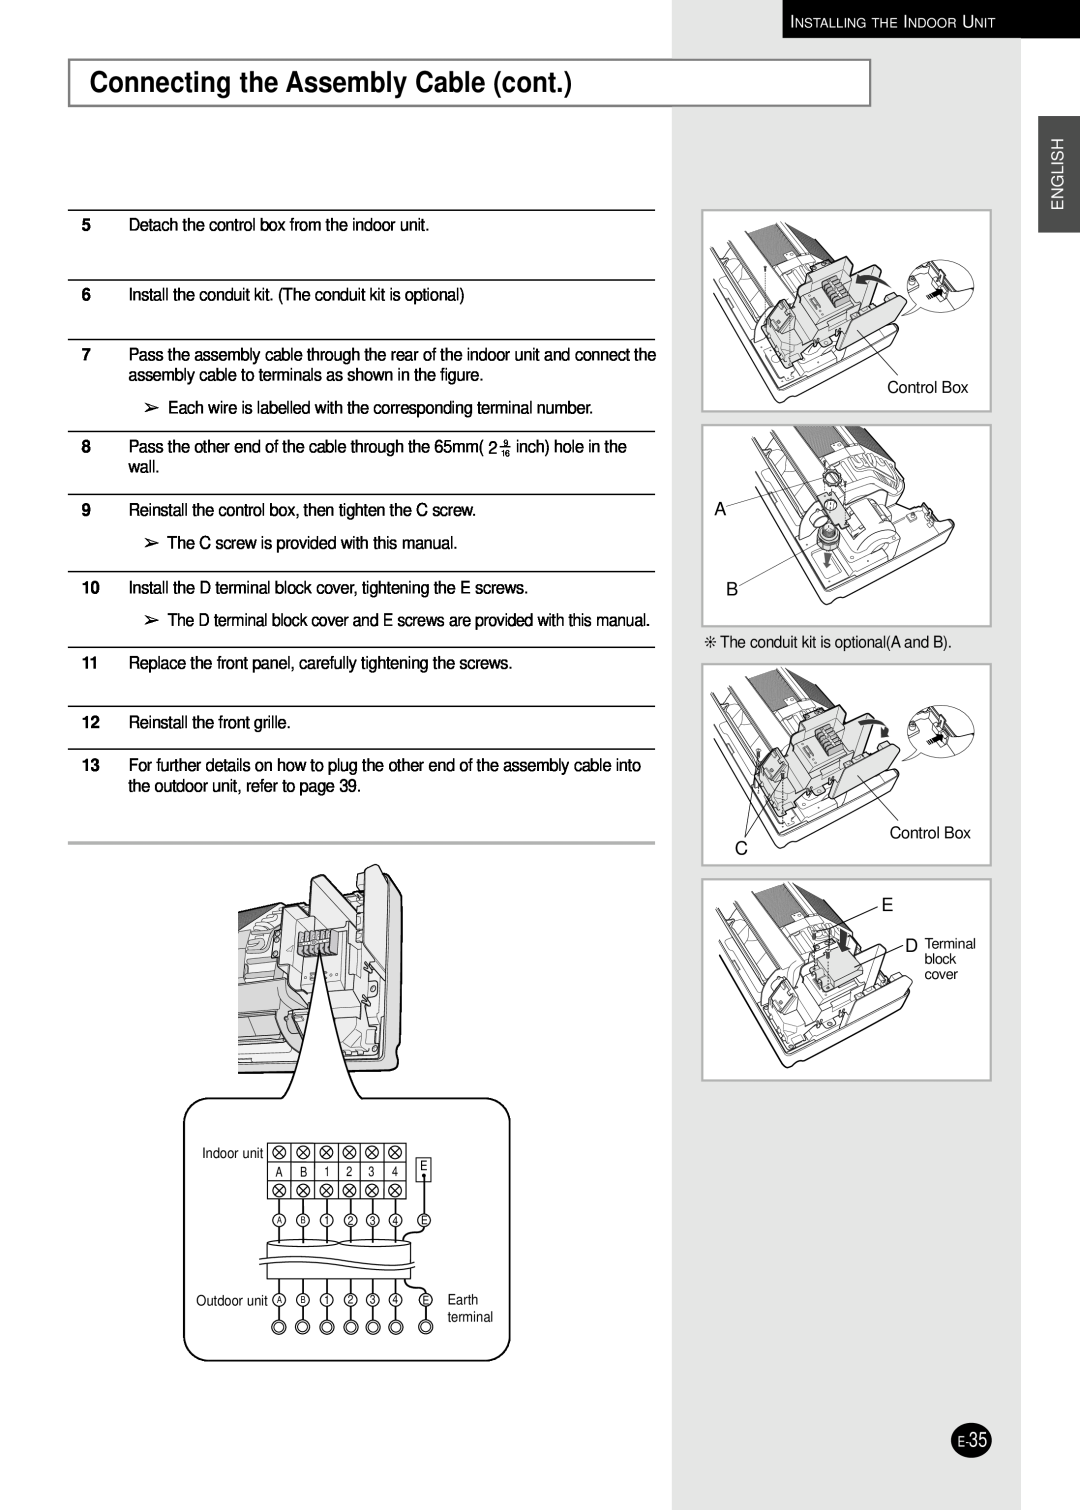 Samsung AQ30C1(2)BC installation manual Connecting the Assembly Cable cont, English 